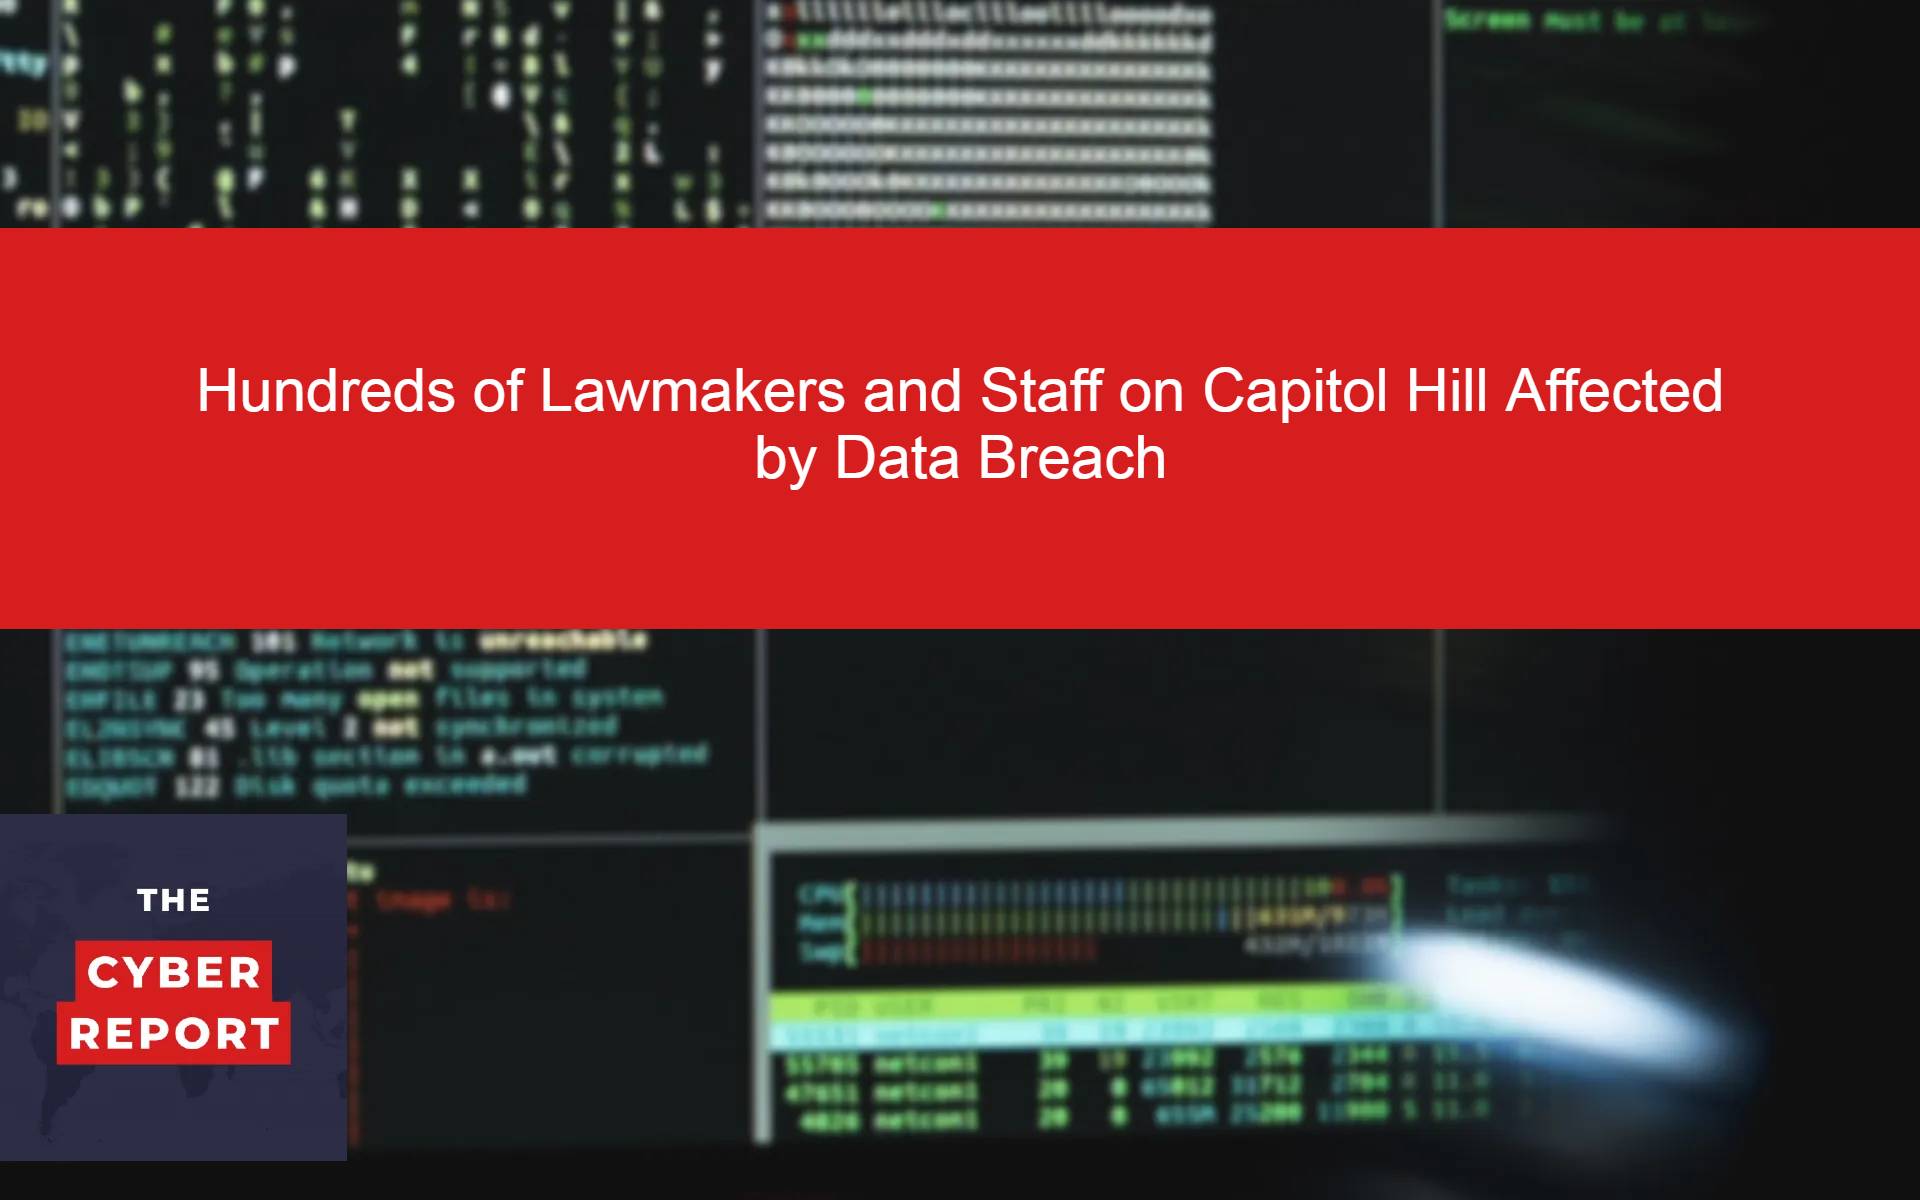 Hundreds of Lawmakers and Staff on Capitol Hill Affected by Data Breach